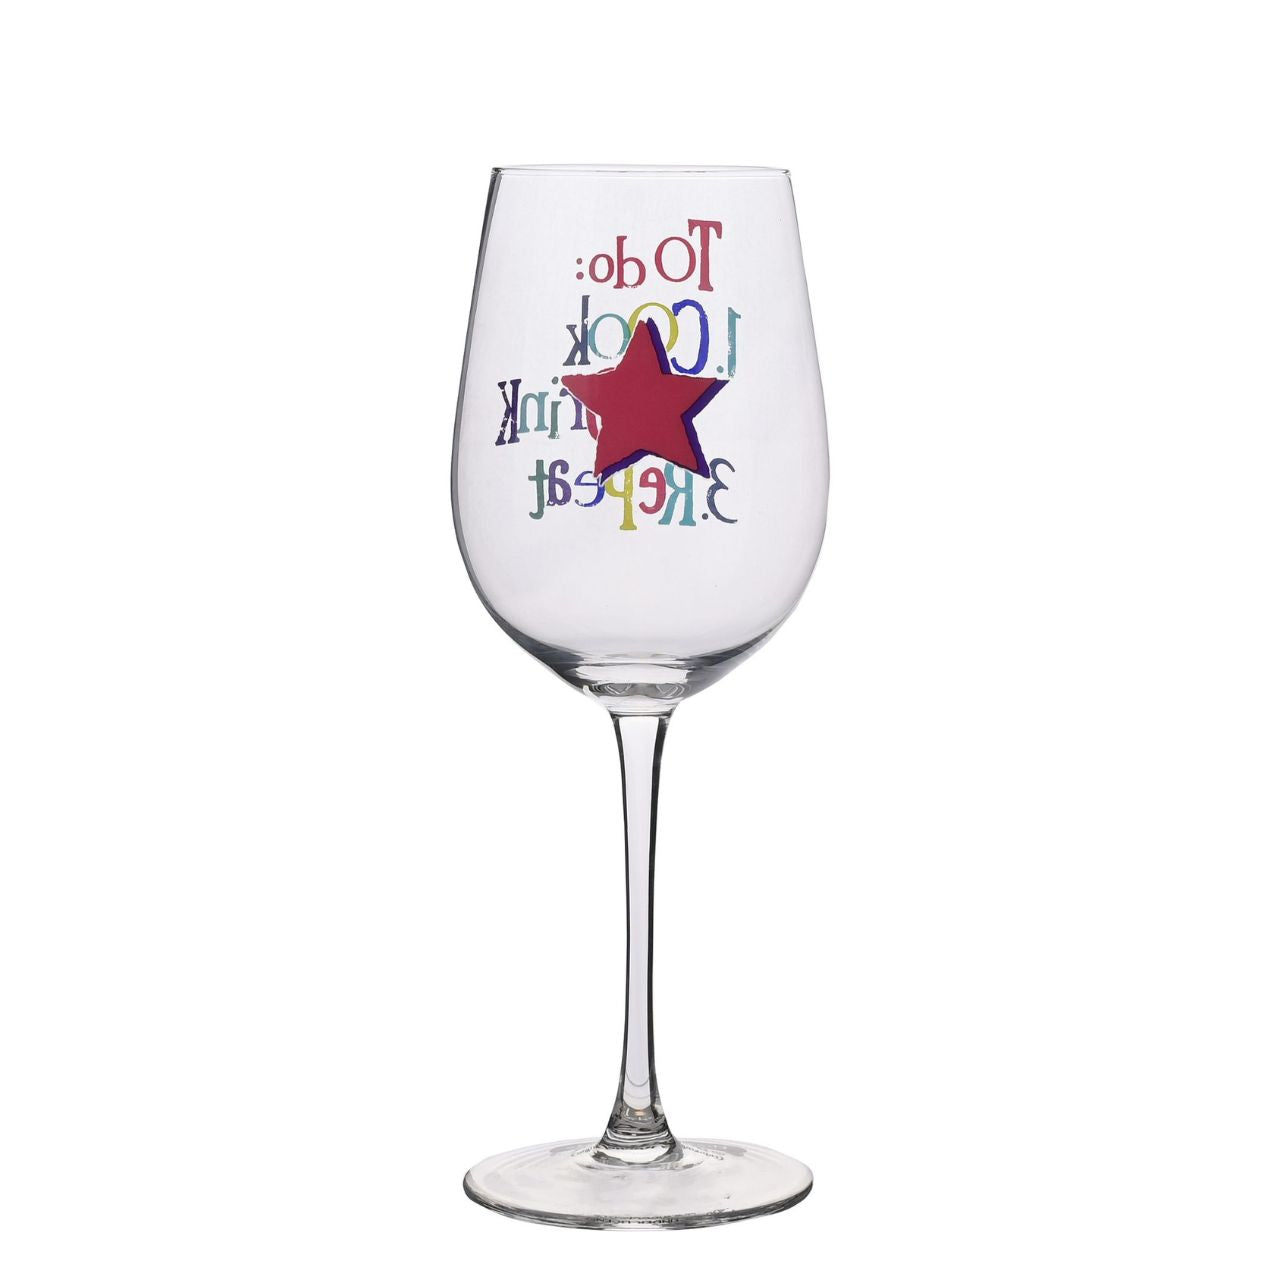 This fun-filled glassware makes a tongue-in-cheek gift for those who enjoy a glass of wine with their meal.